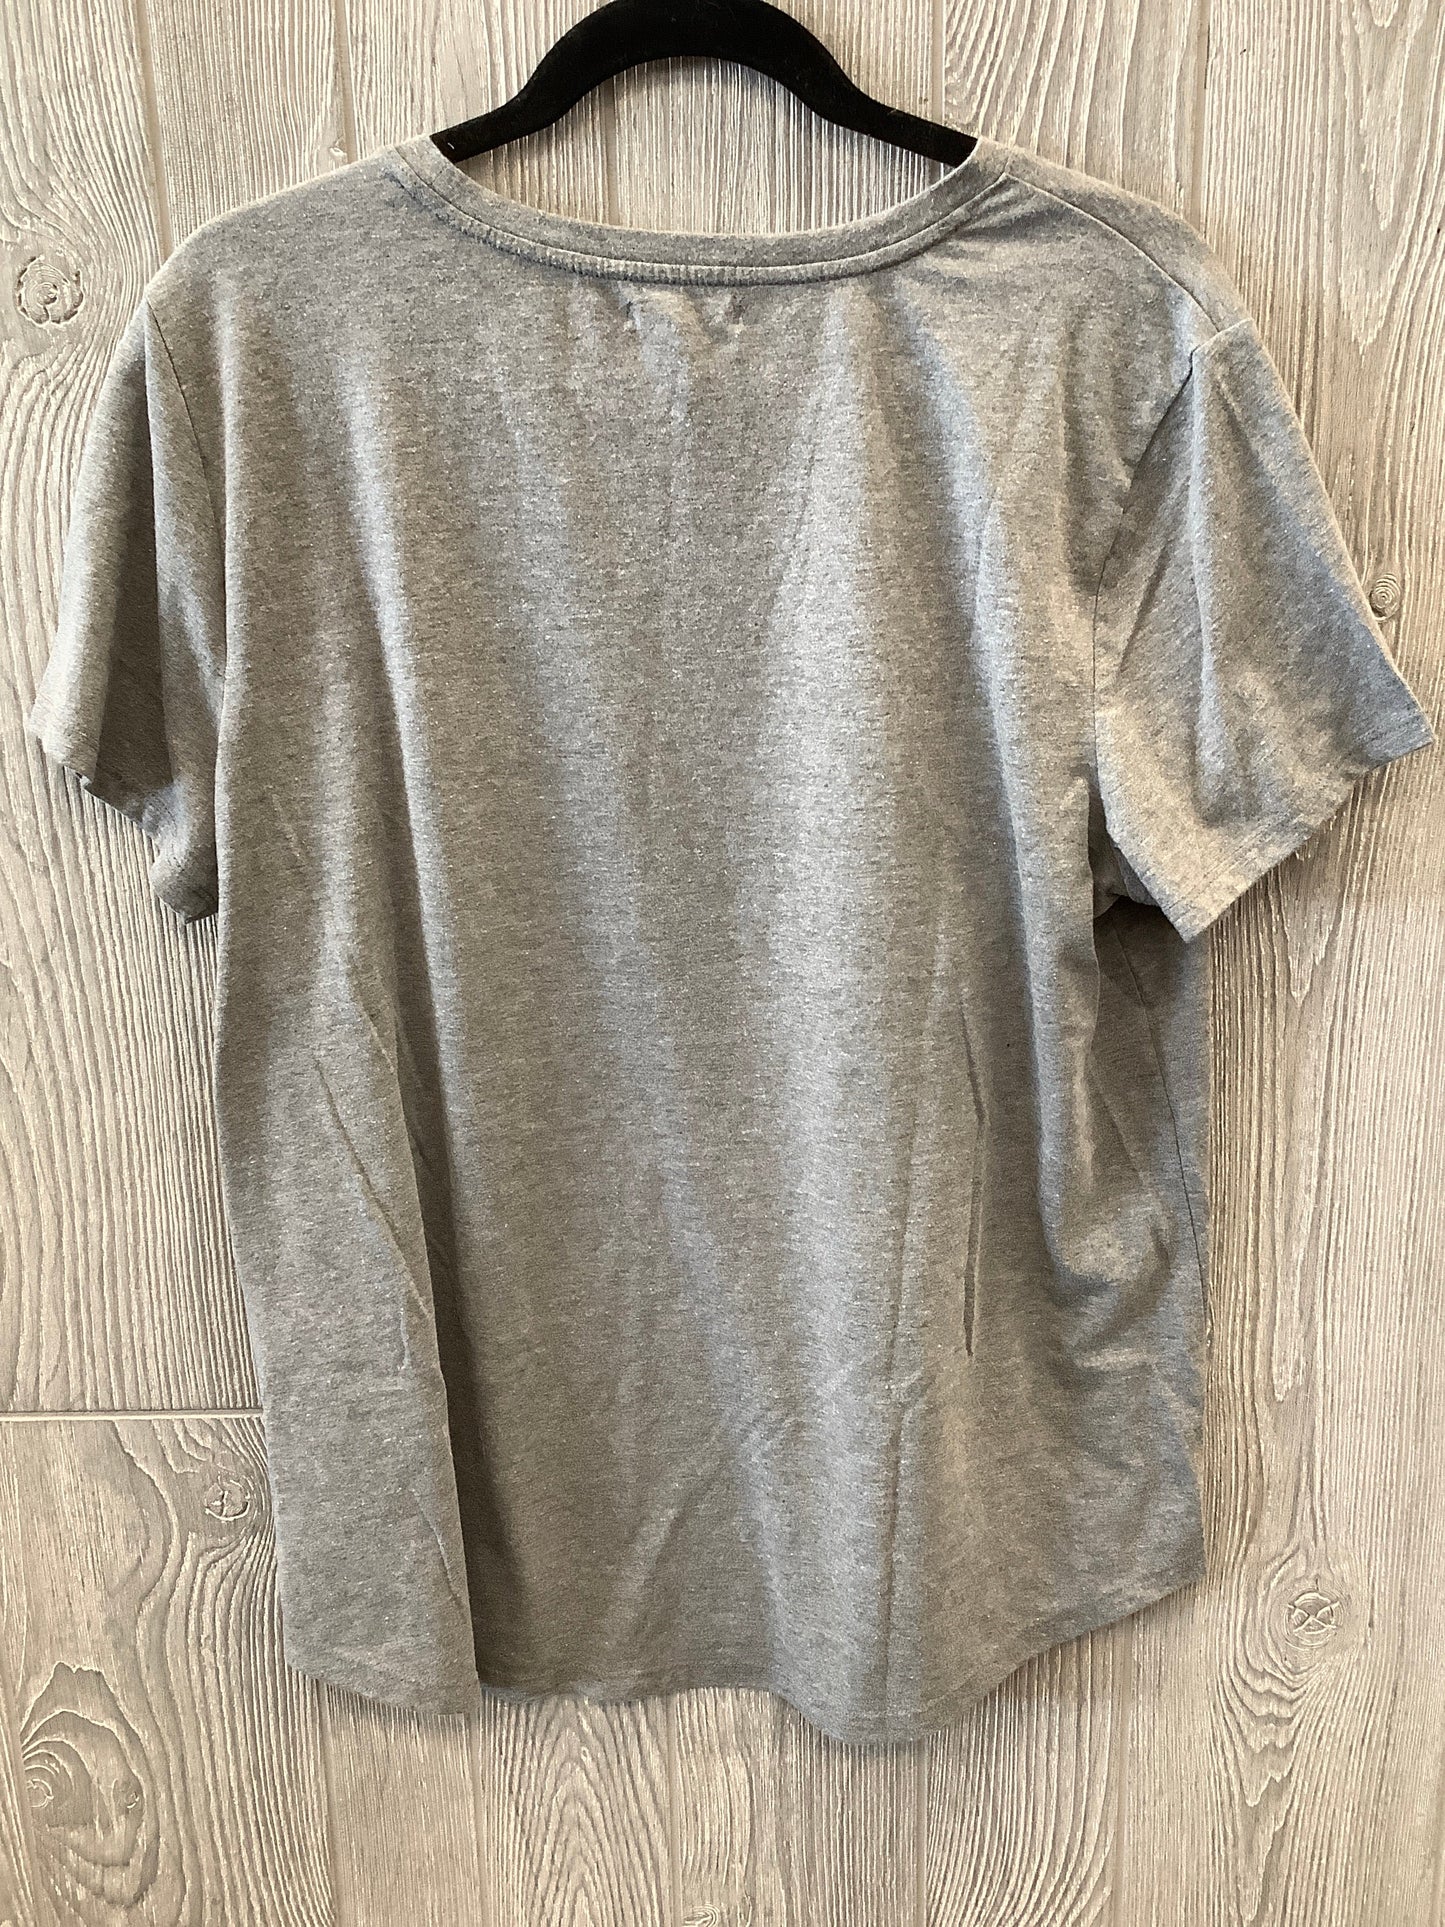 Grey Top Short Sleeve Maurices, Size Xl